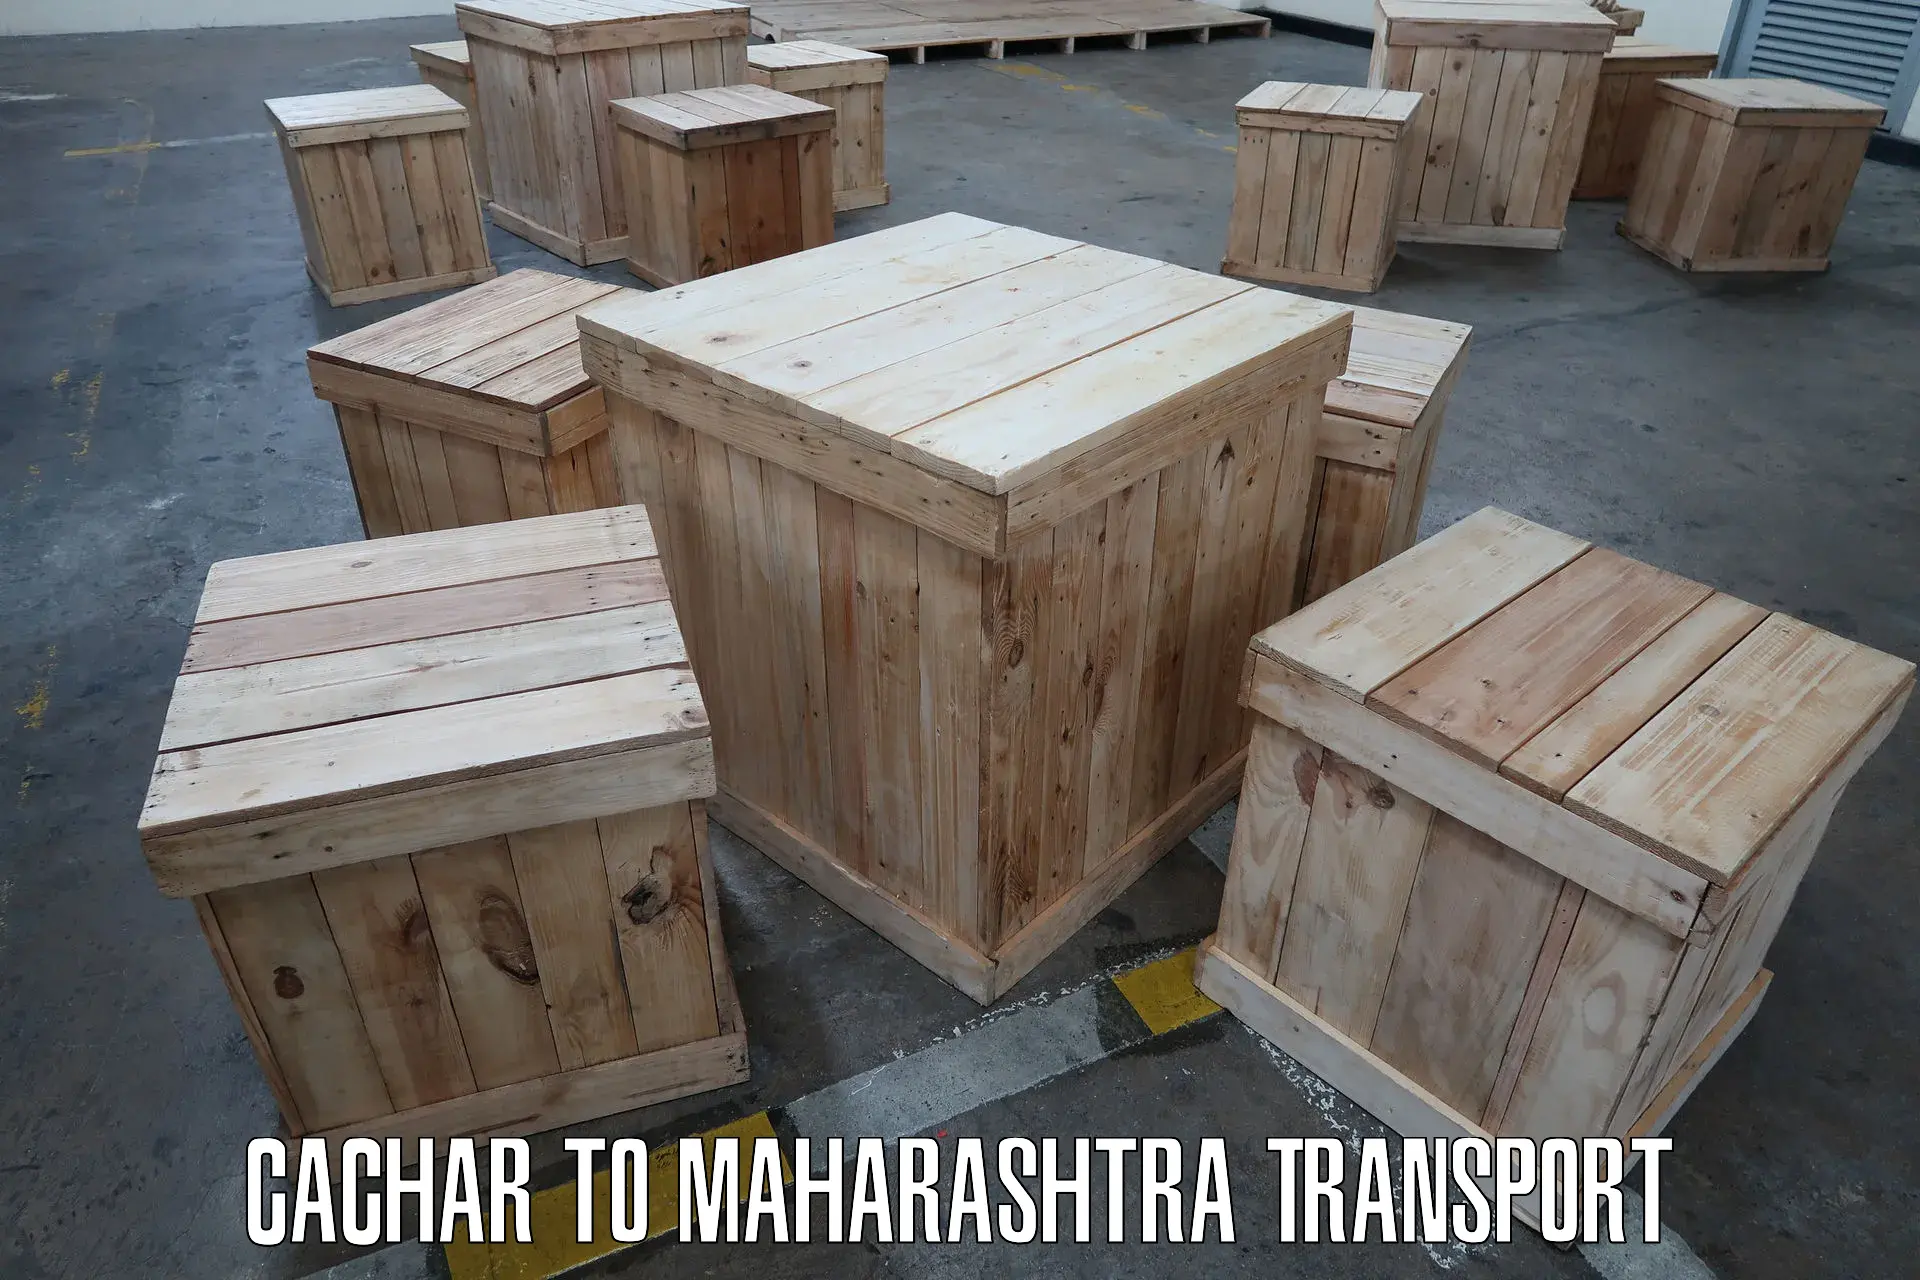 Container transport service Cachar to Chandrapur